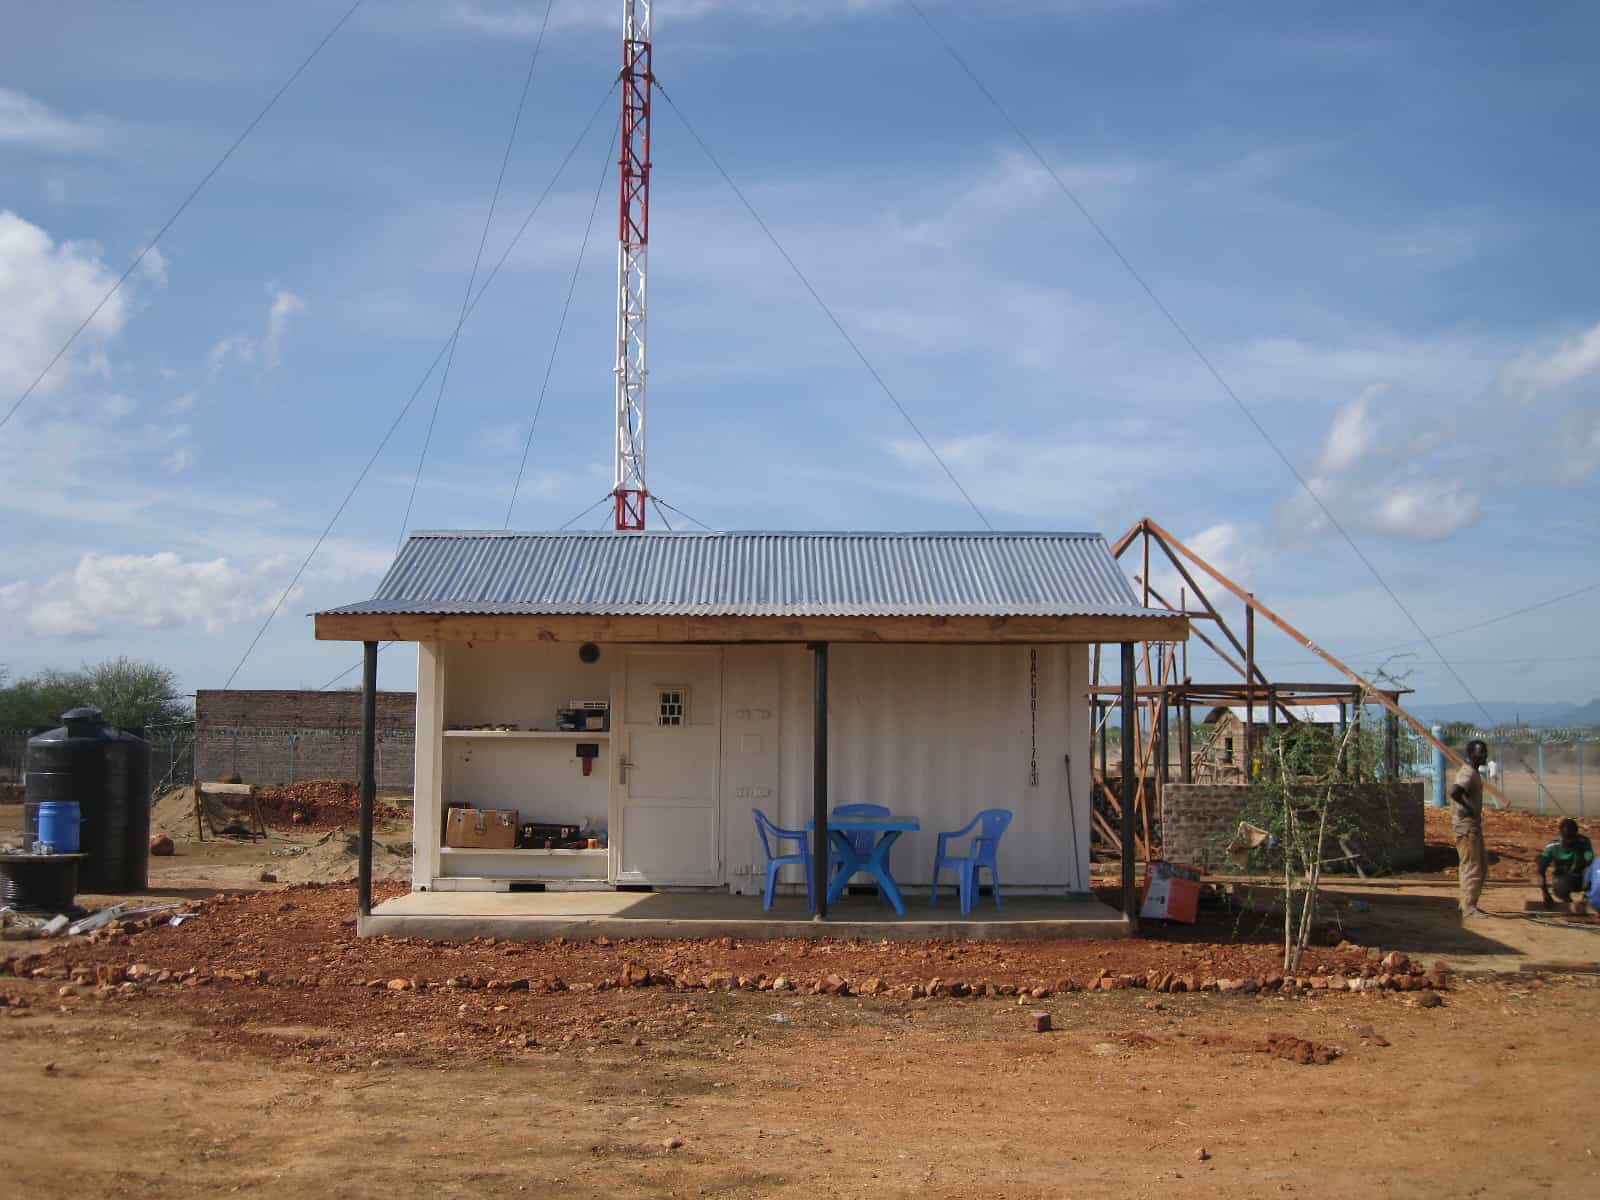 Small building with a radio tower.